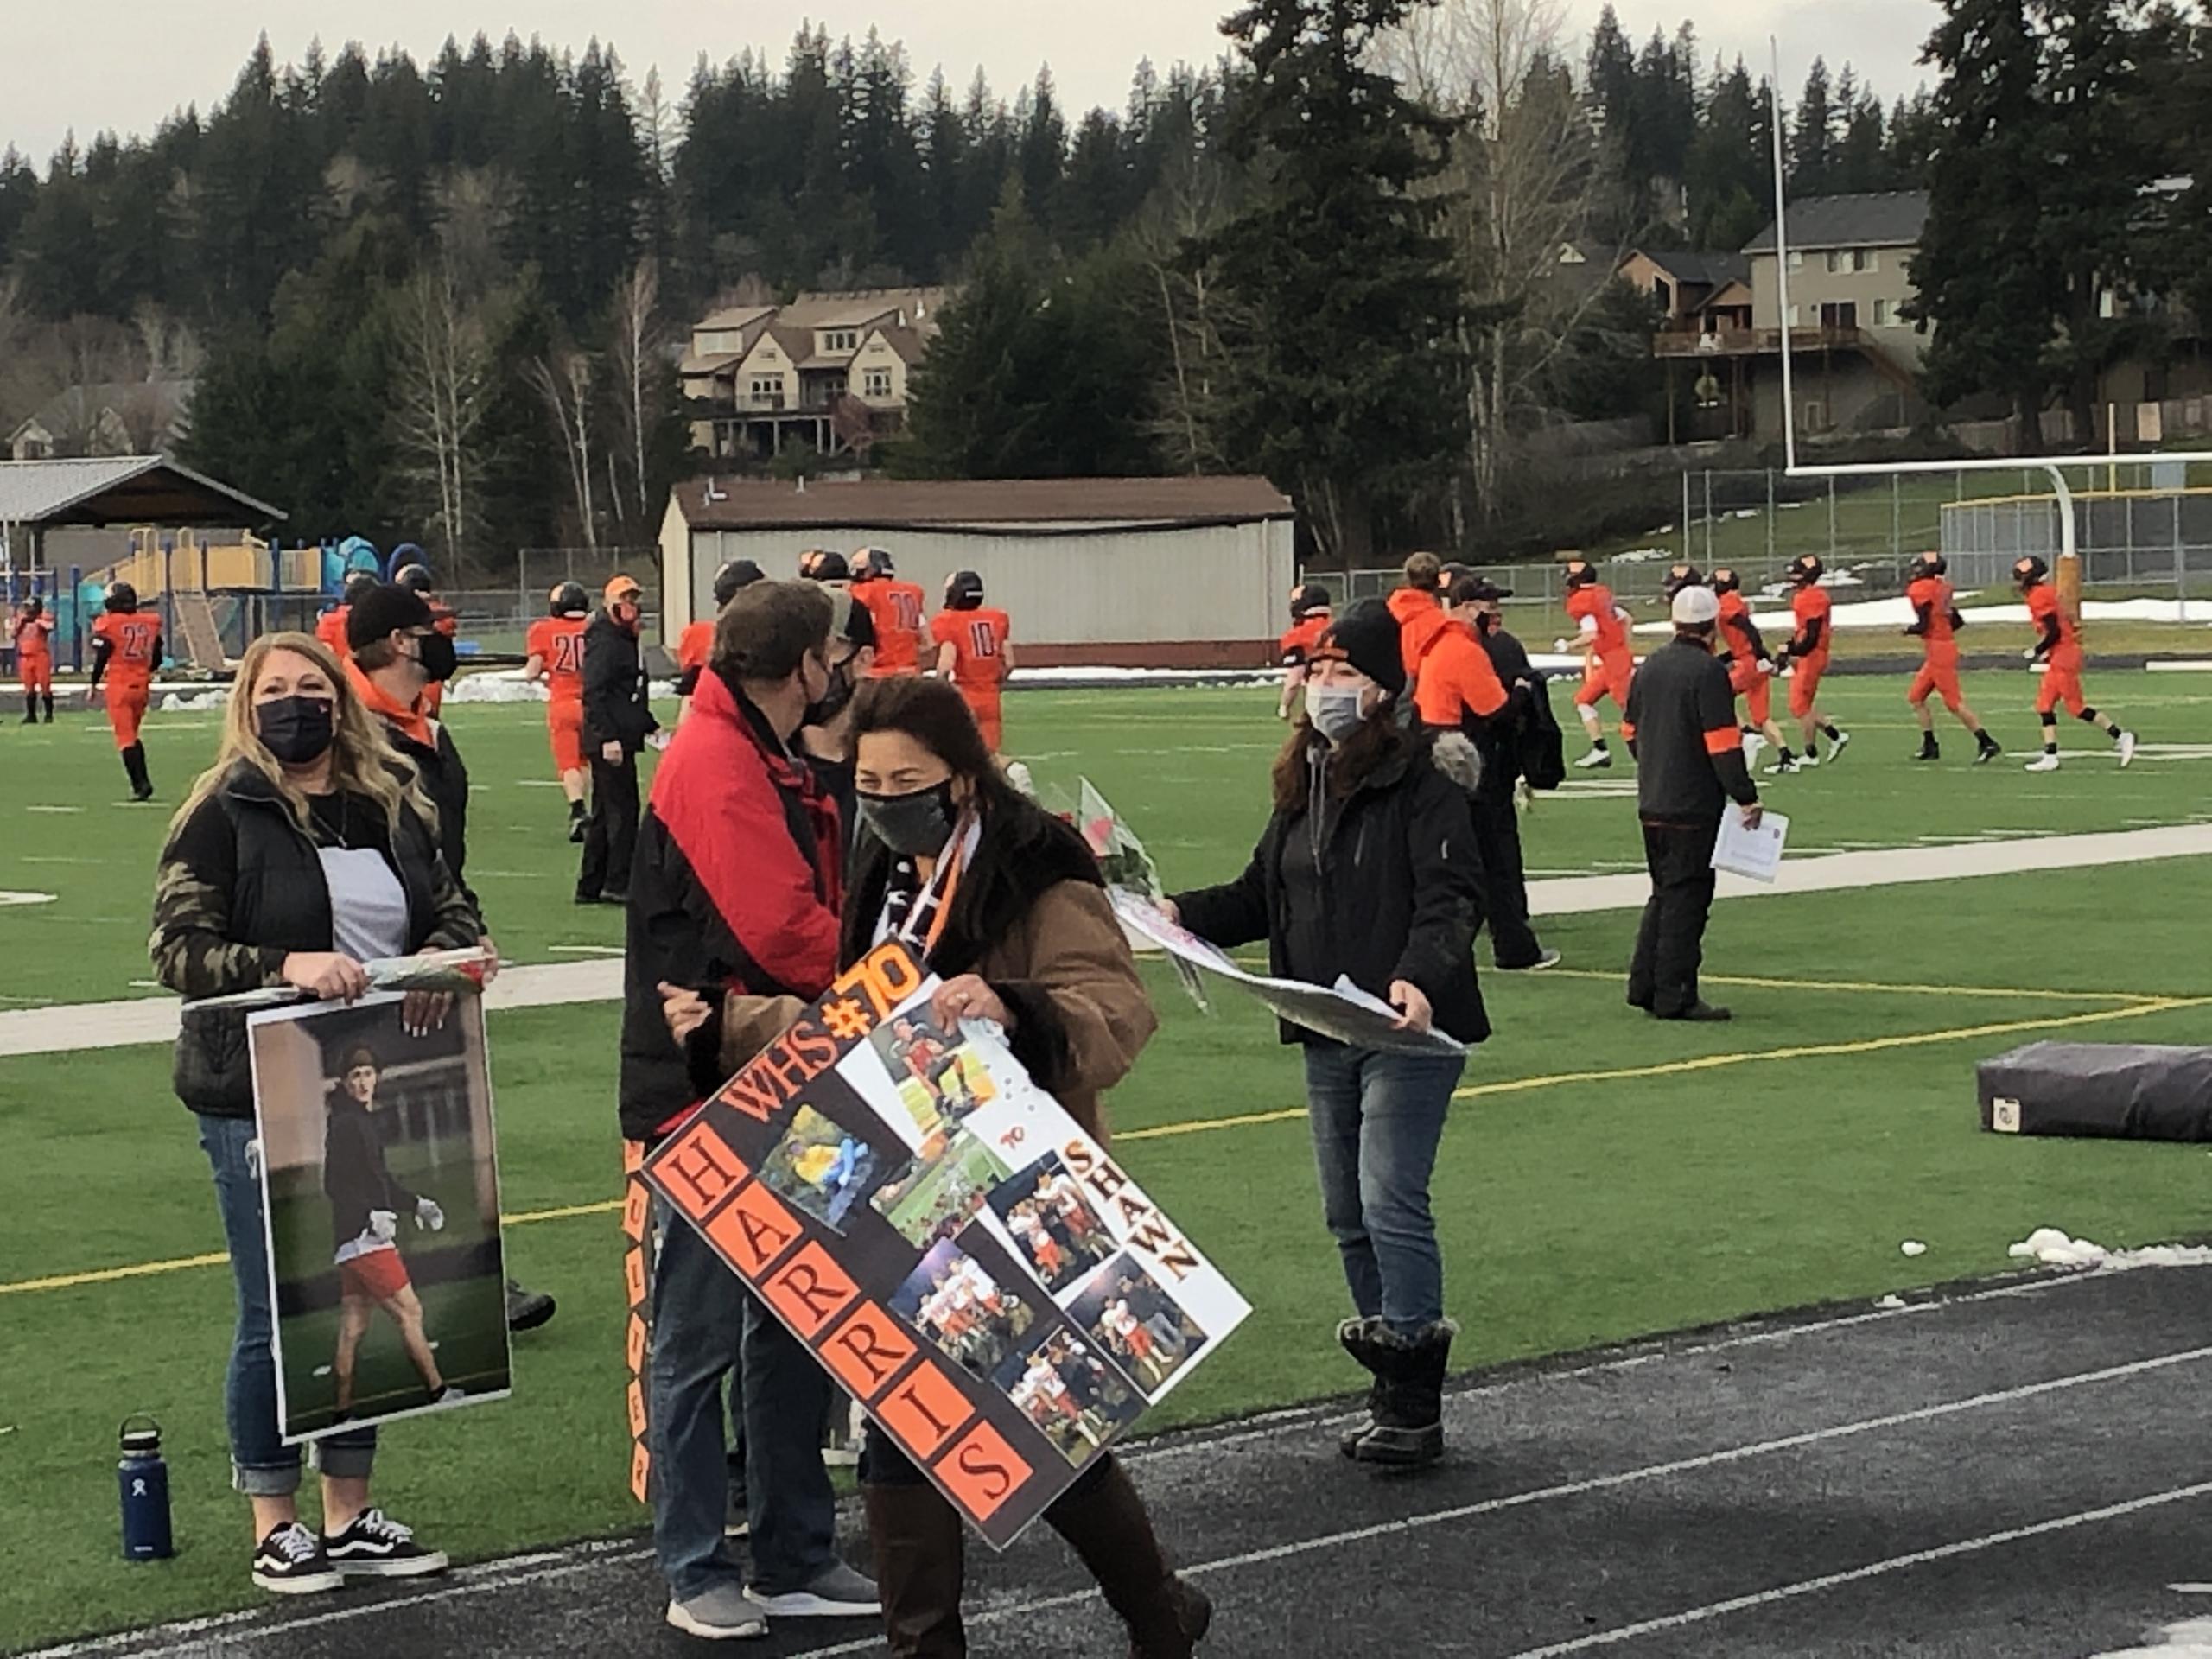 Parents of Washougal High School football seniors show special posters before Saturday's game against Mark Morris at Fishback Stadium. With COVID-19 casting uncertainty over the season, Washougal held its Senior Night festivities before its season-opening game Saturday.